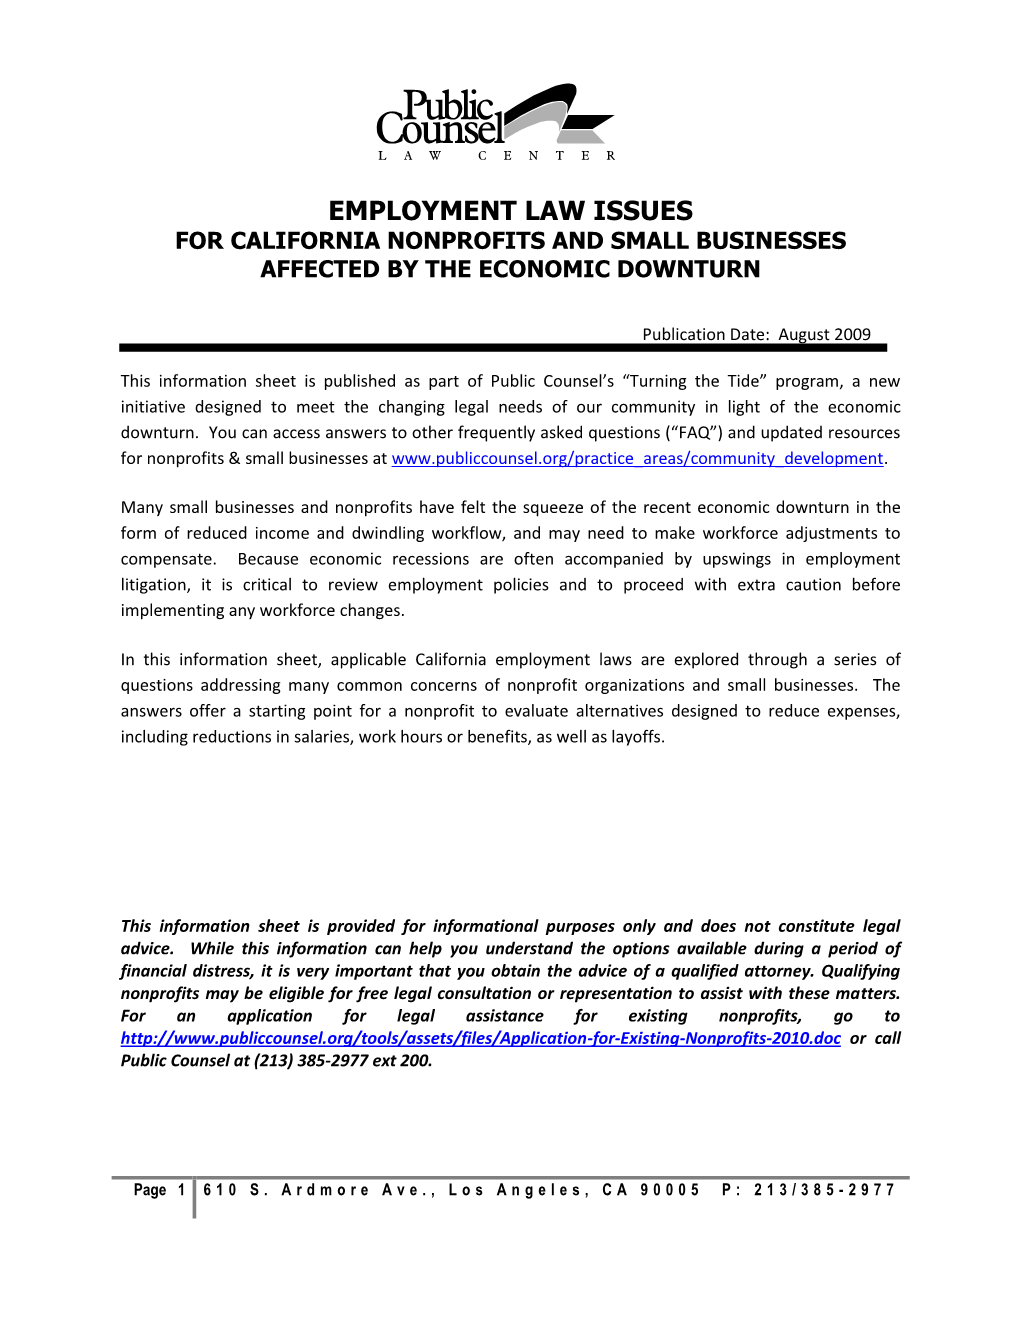 Employment Law Issues for California Nonprofits and Small Businesses Affected by the Economic Downturn